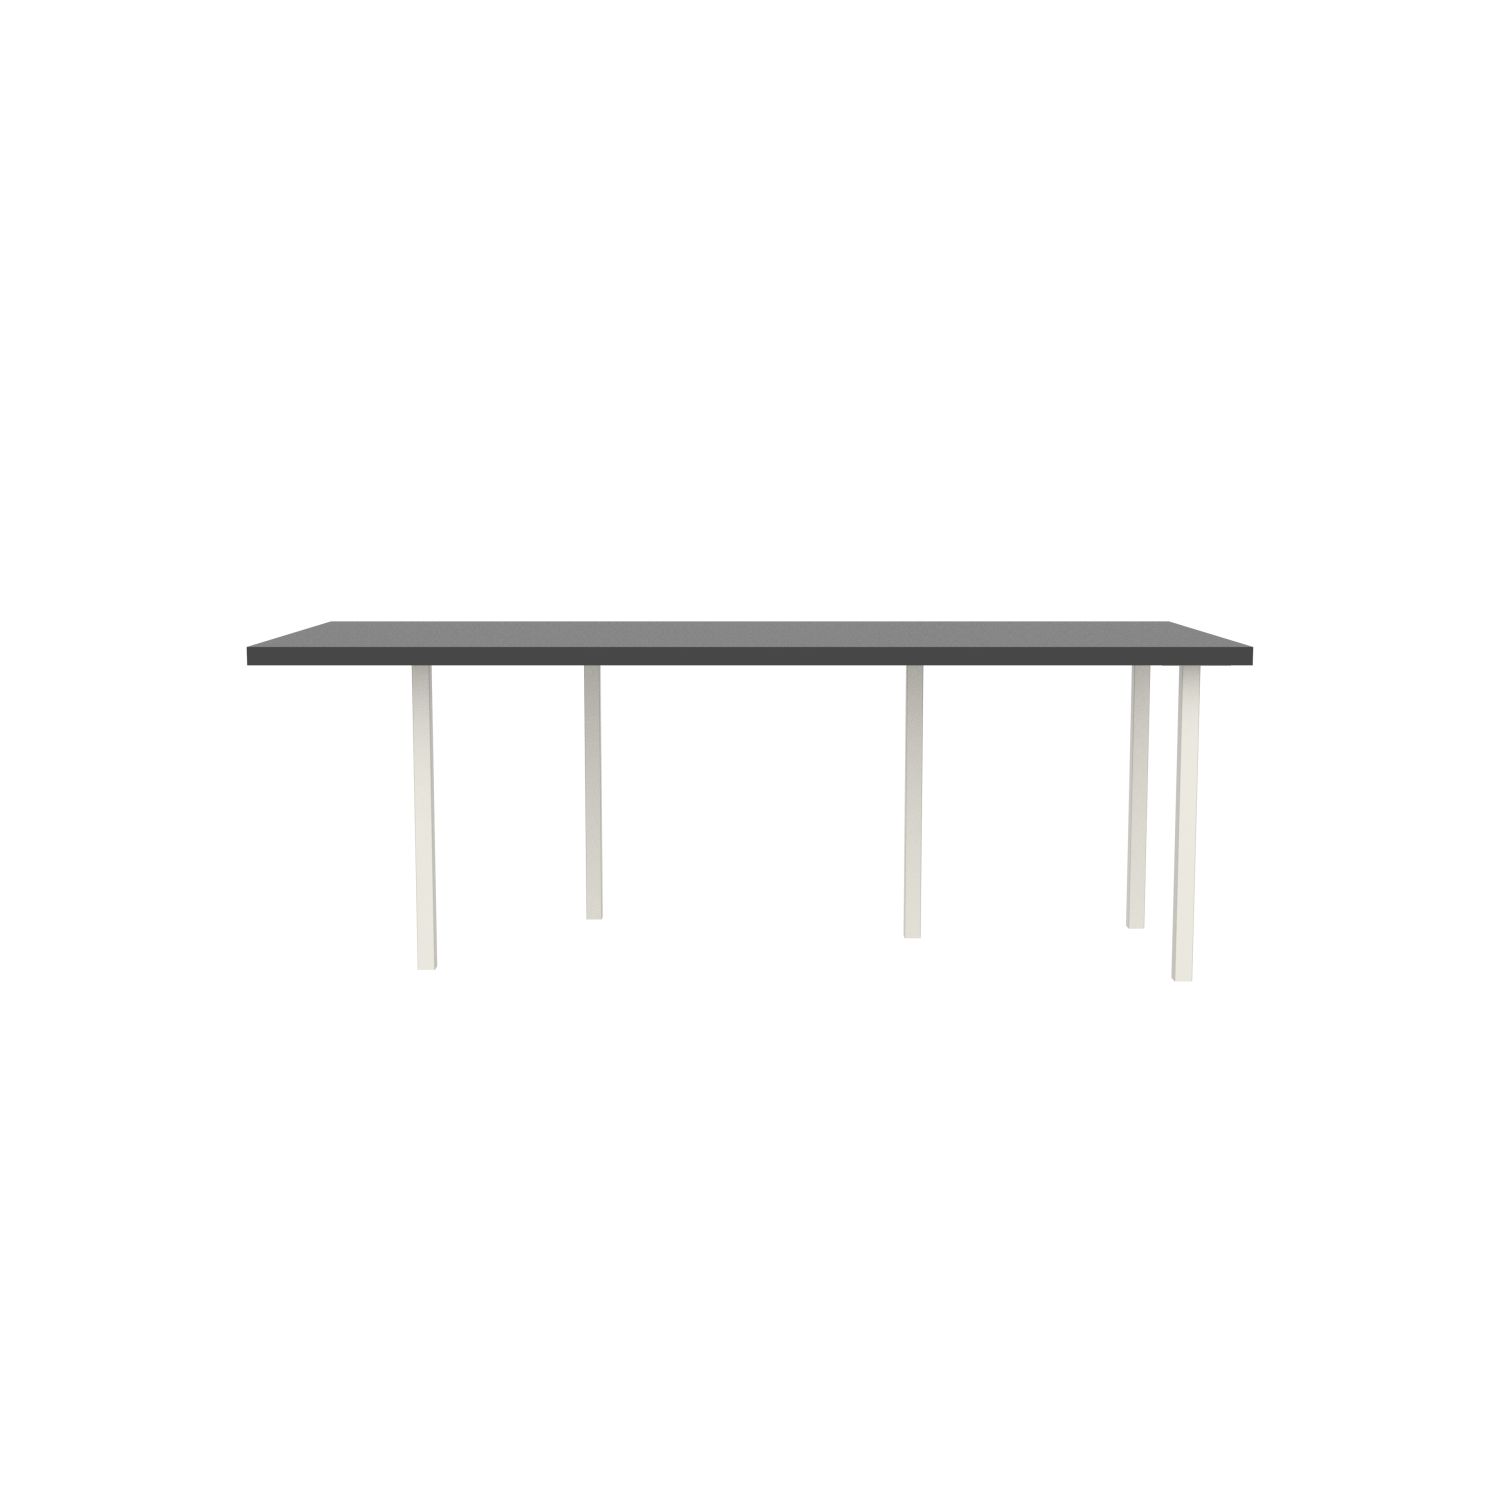 lensvelt bbrand table five fixed heigt 915x218 hpl black 50 mm price level 1 white ral9010